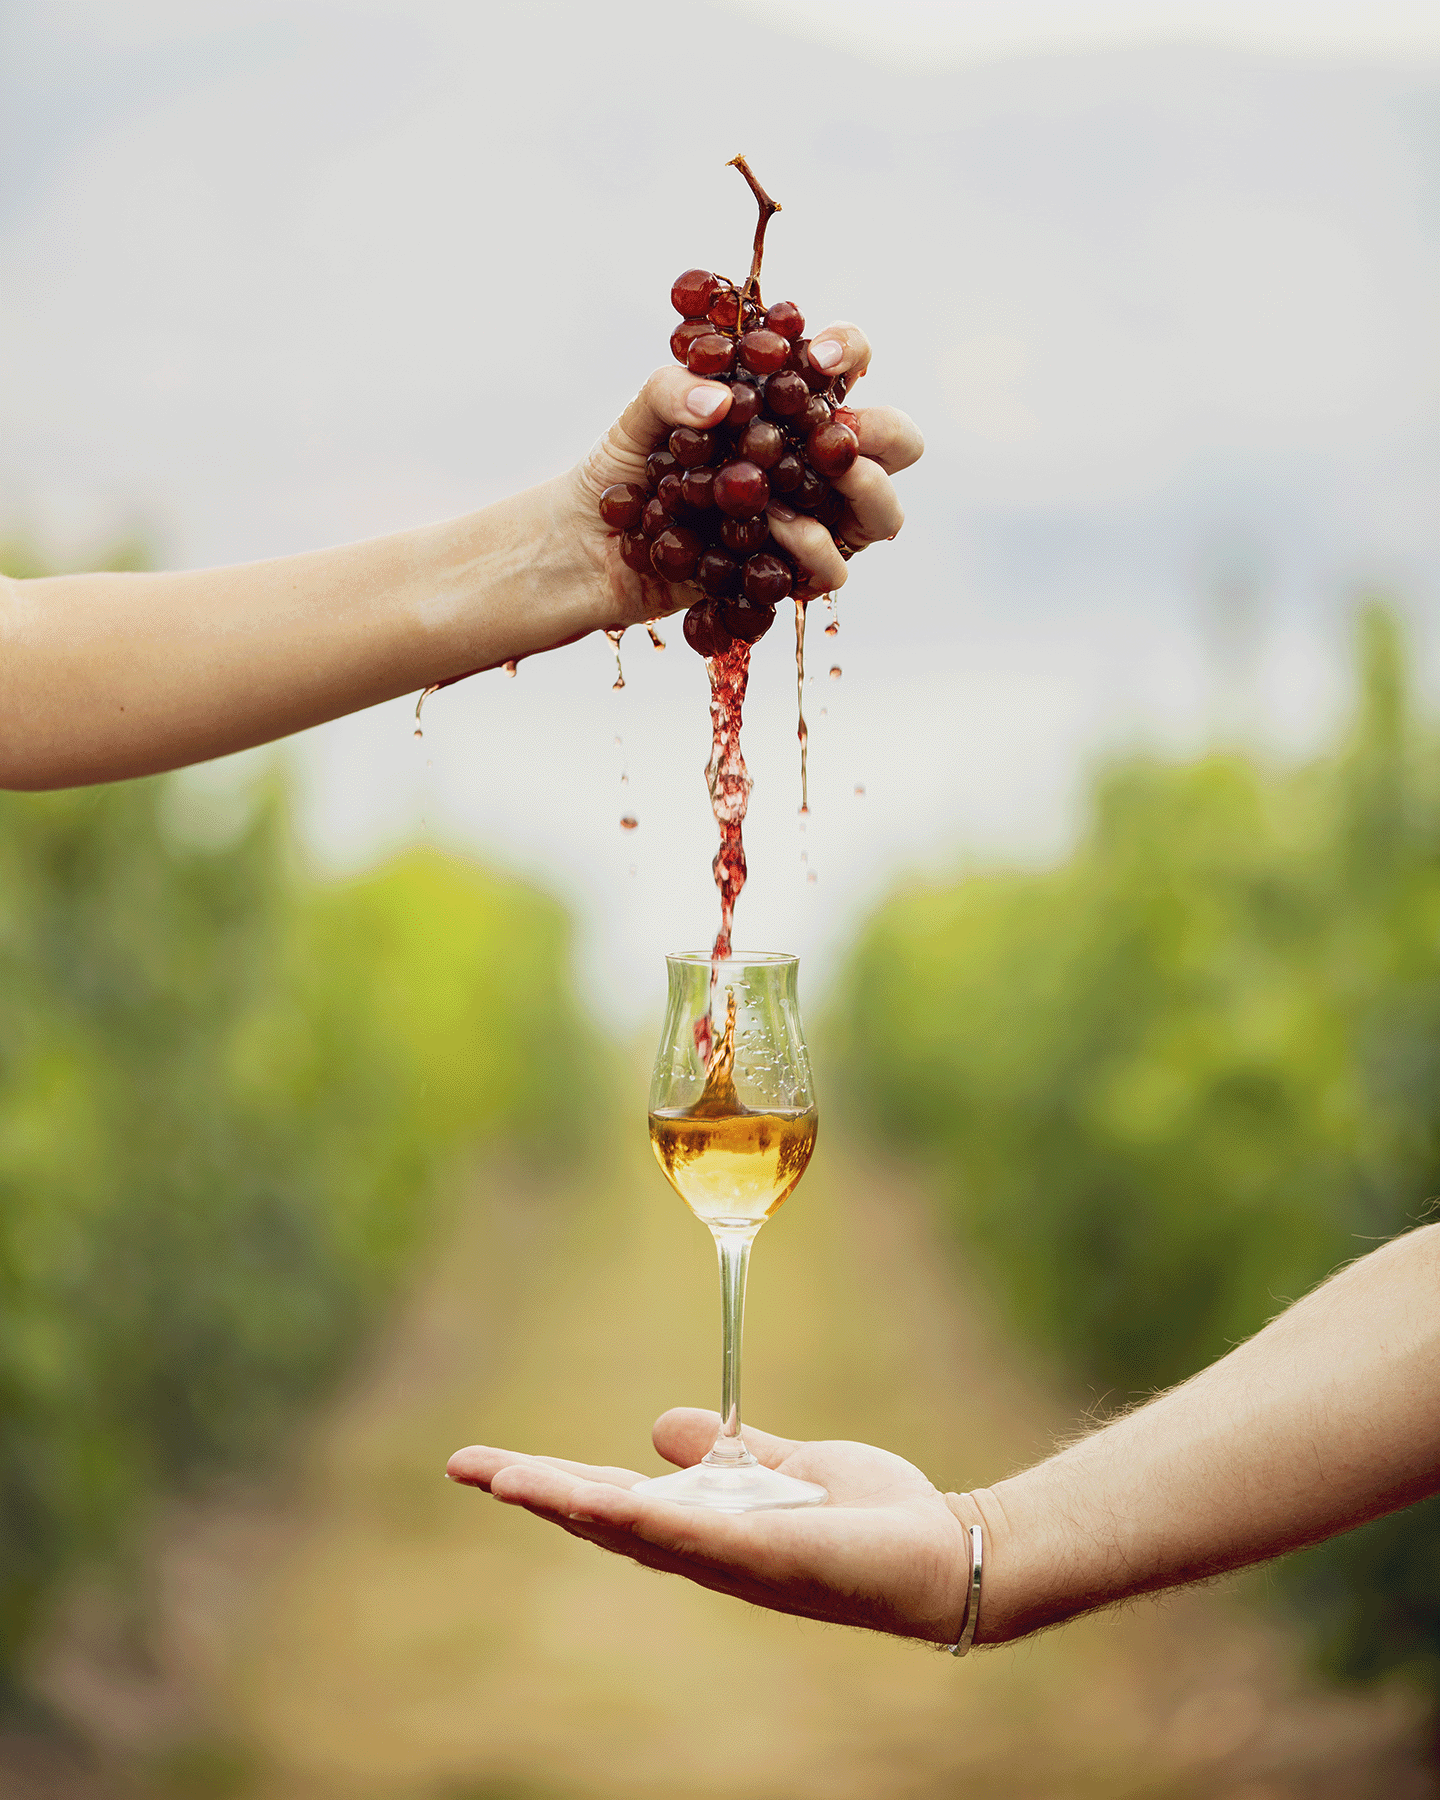 A hand crushing grapes into a glass being held by another hand with a vineyard setting in the background